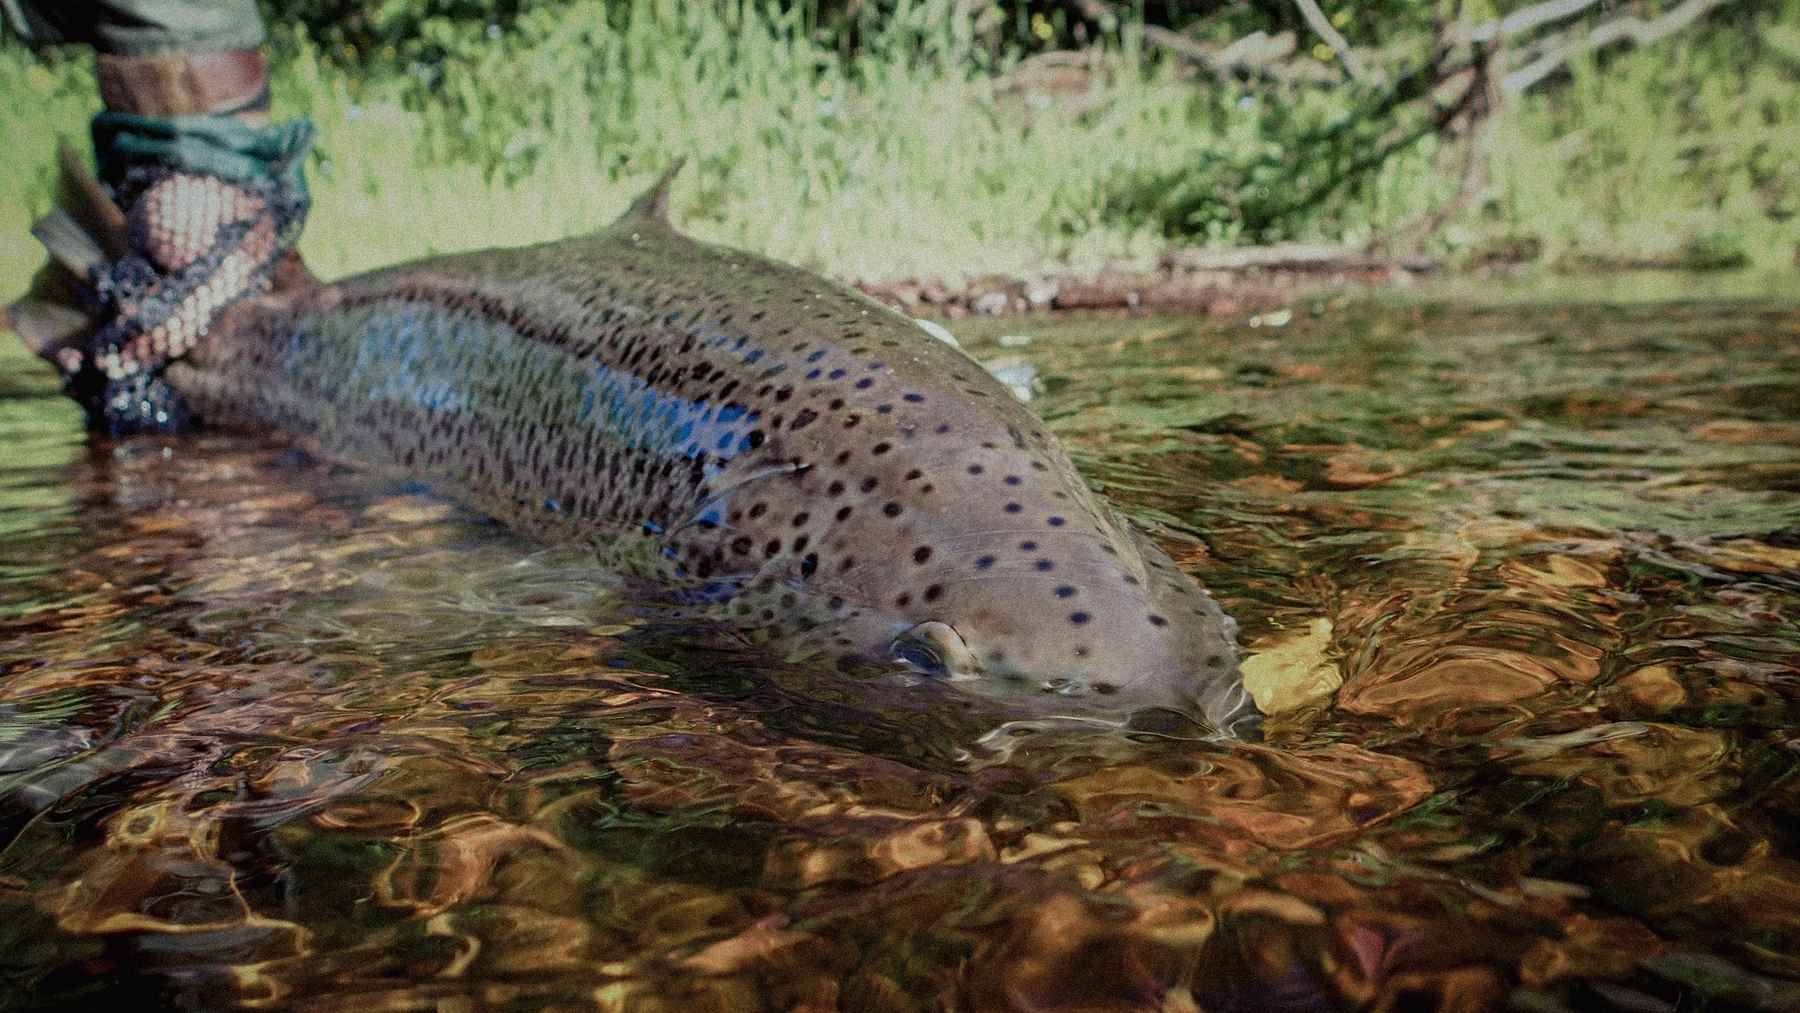 TOP 25 Places to Catch Large Trout Fly Fishing in America